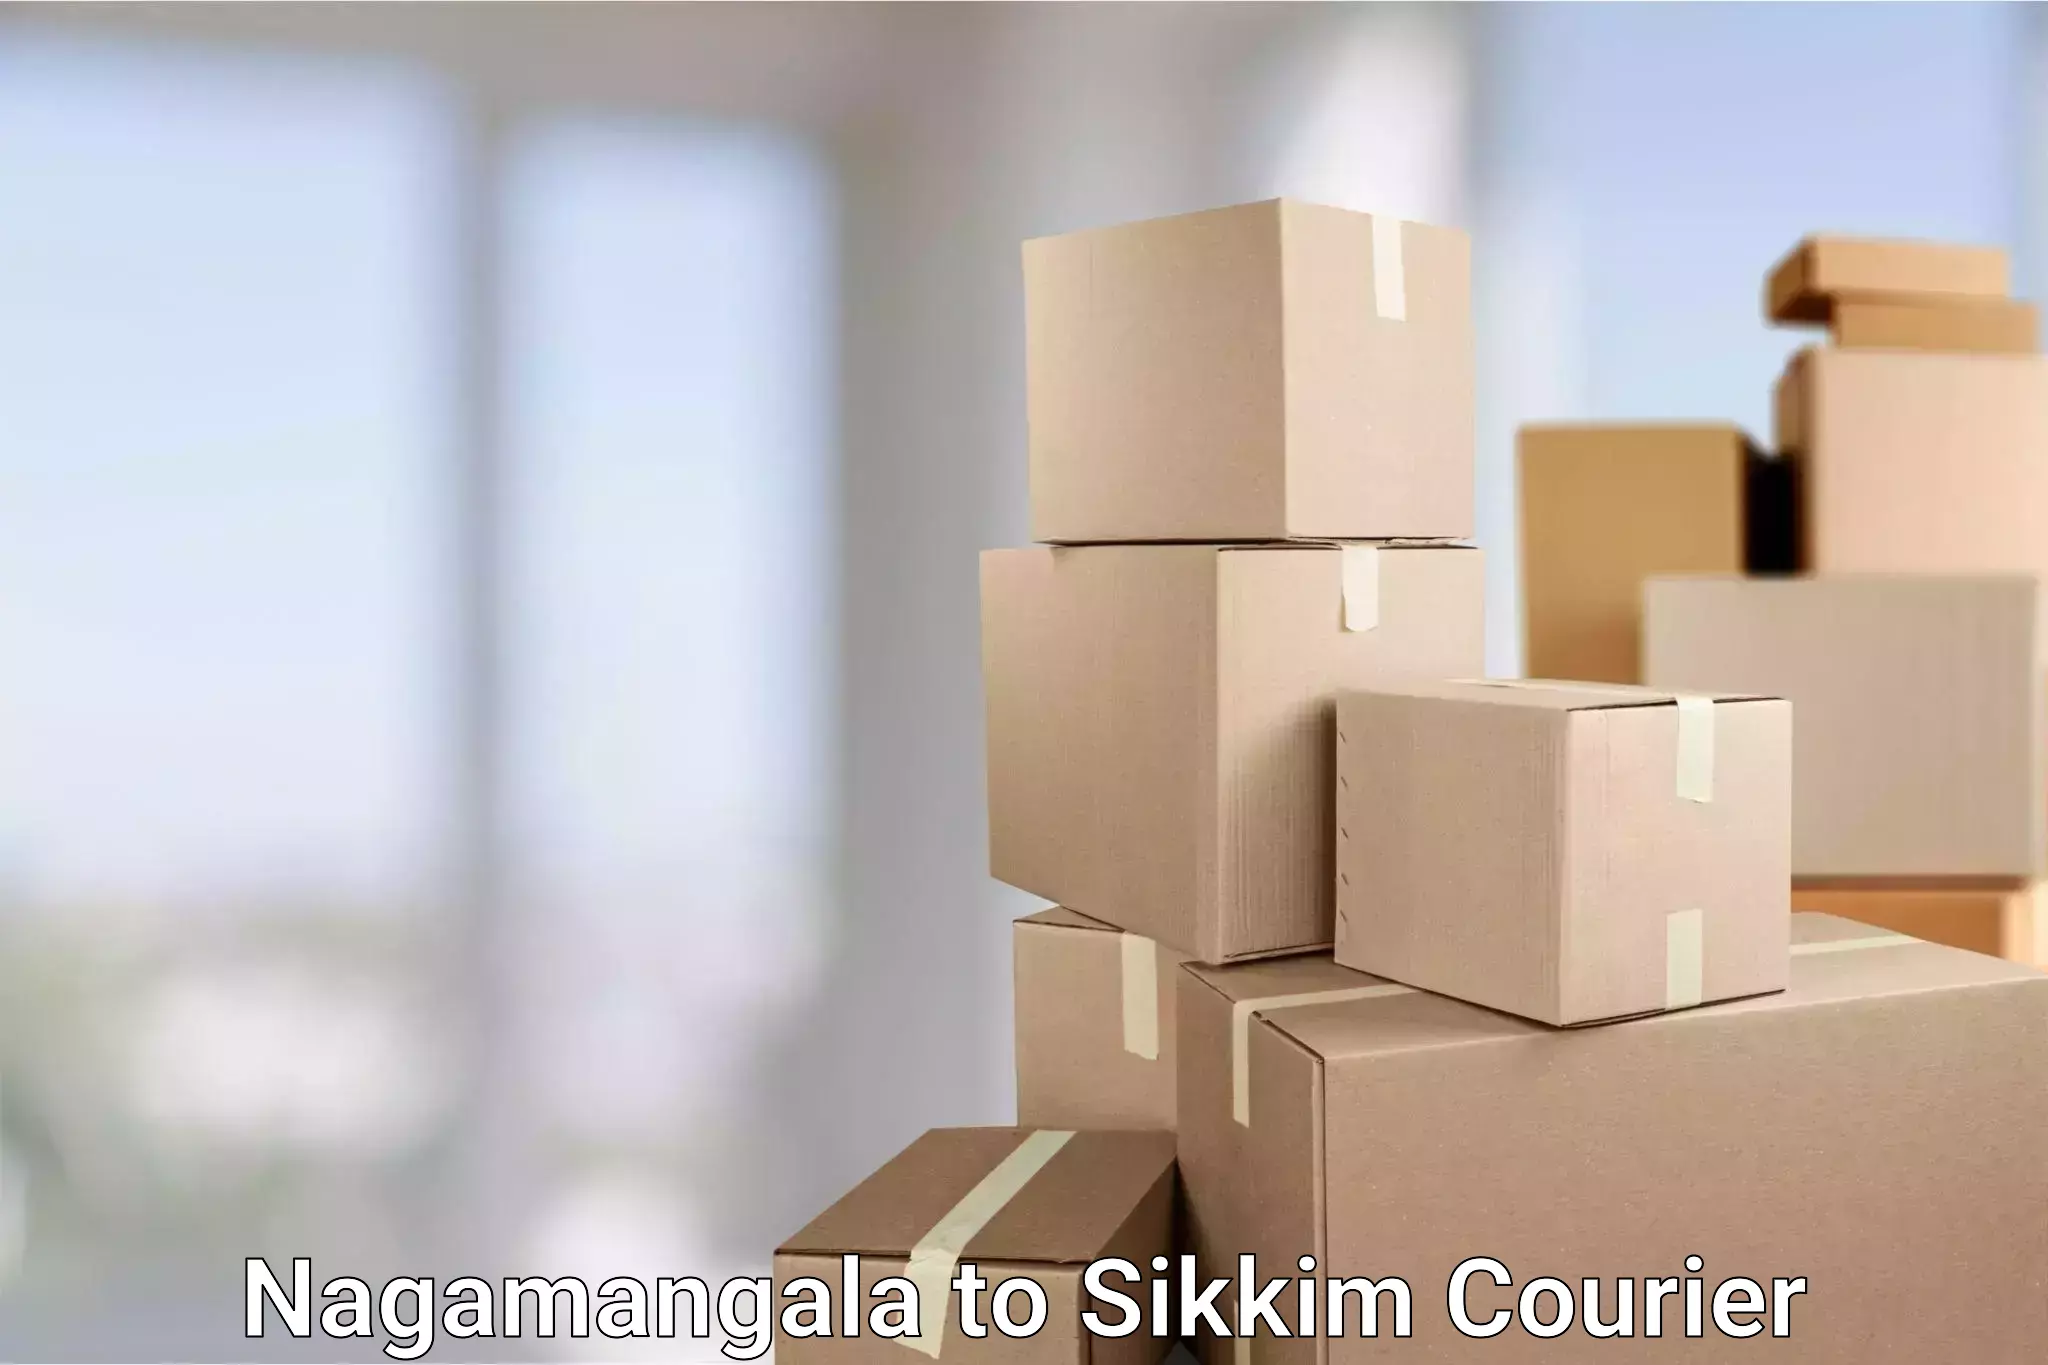 Package delivery network Nagamangala to Sikkim